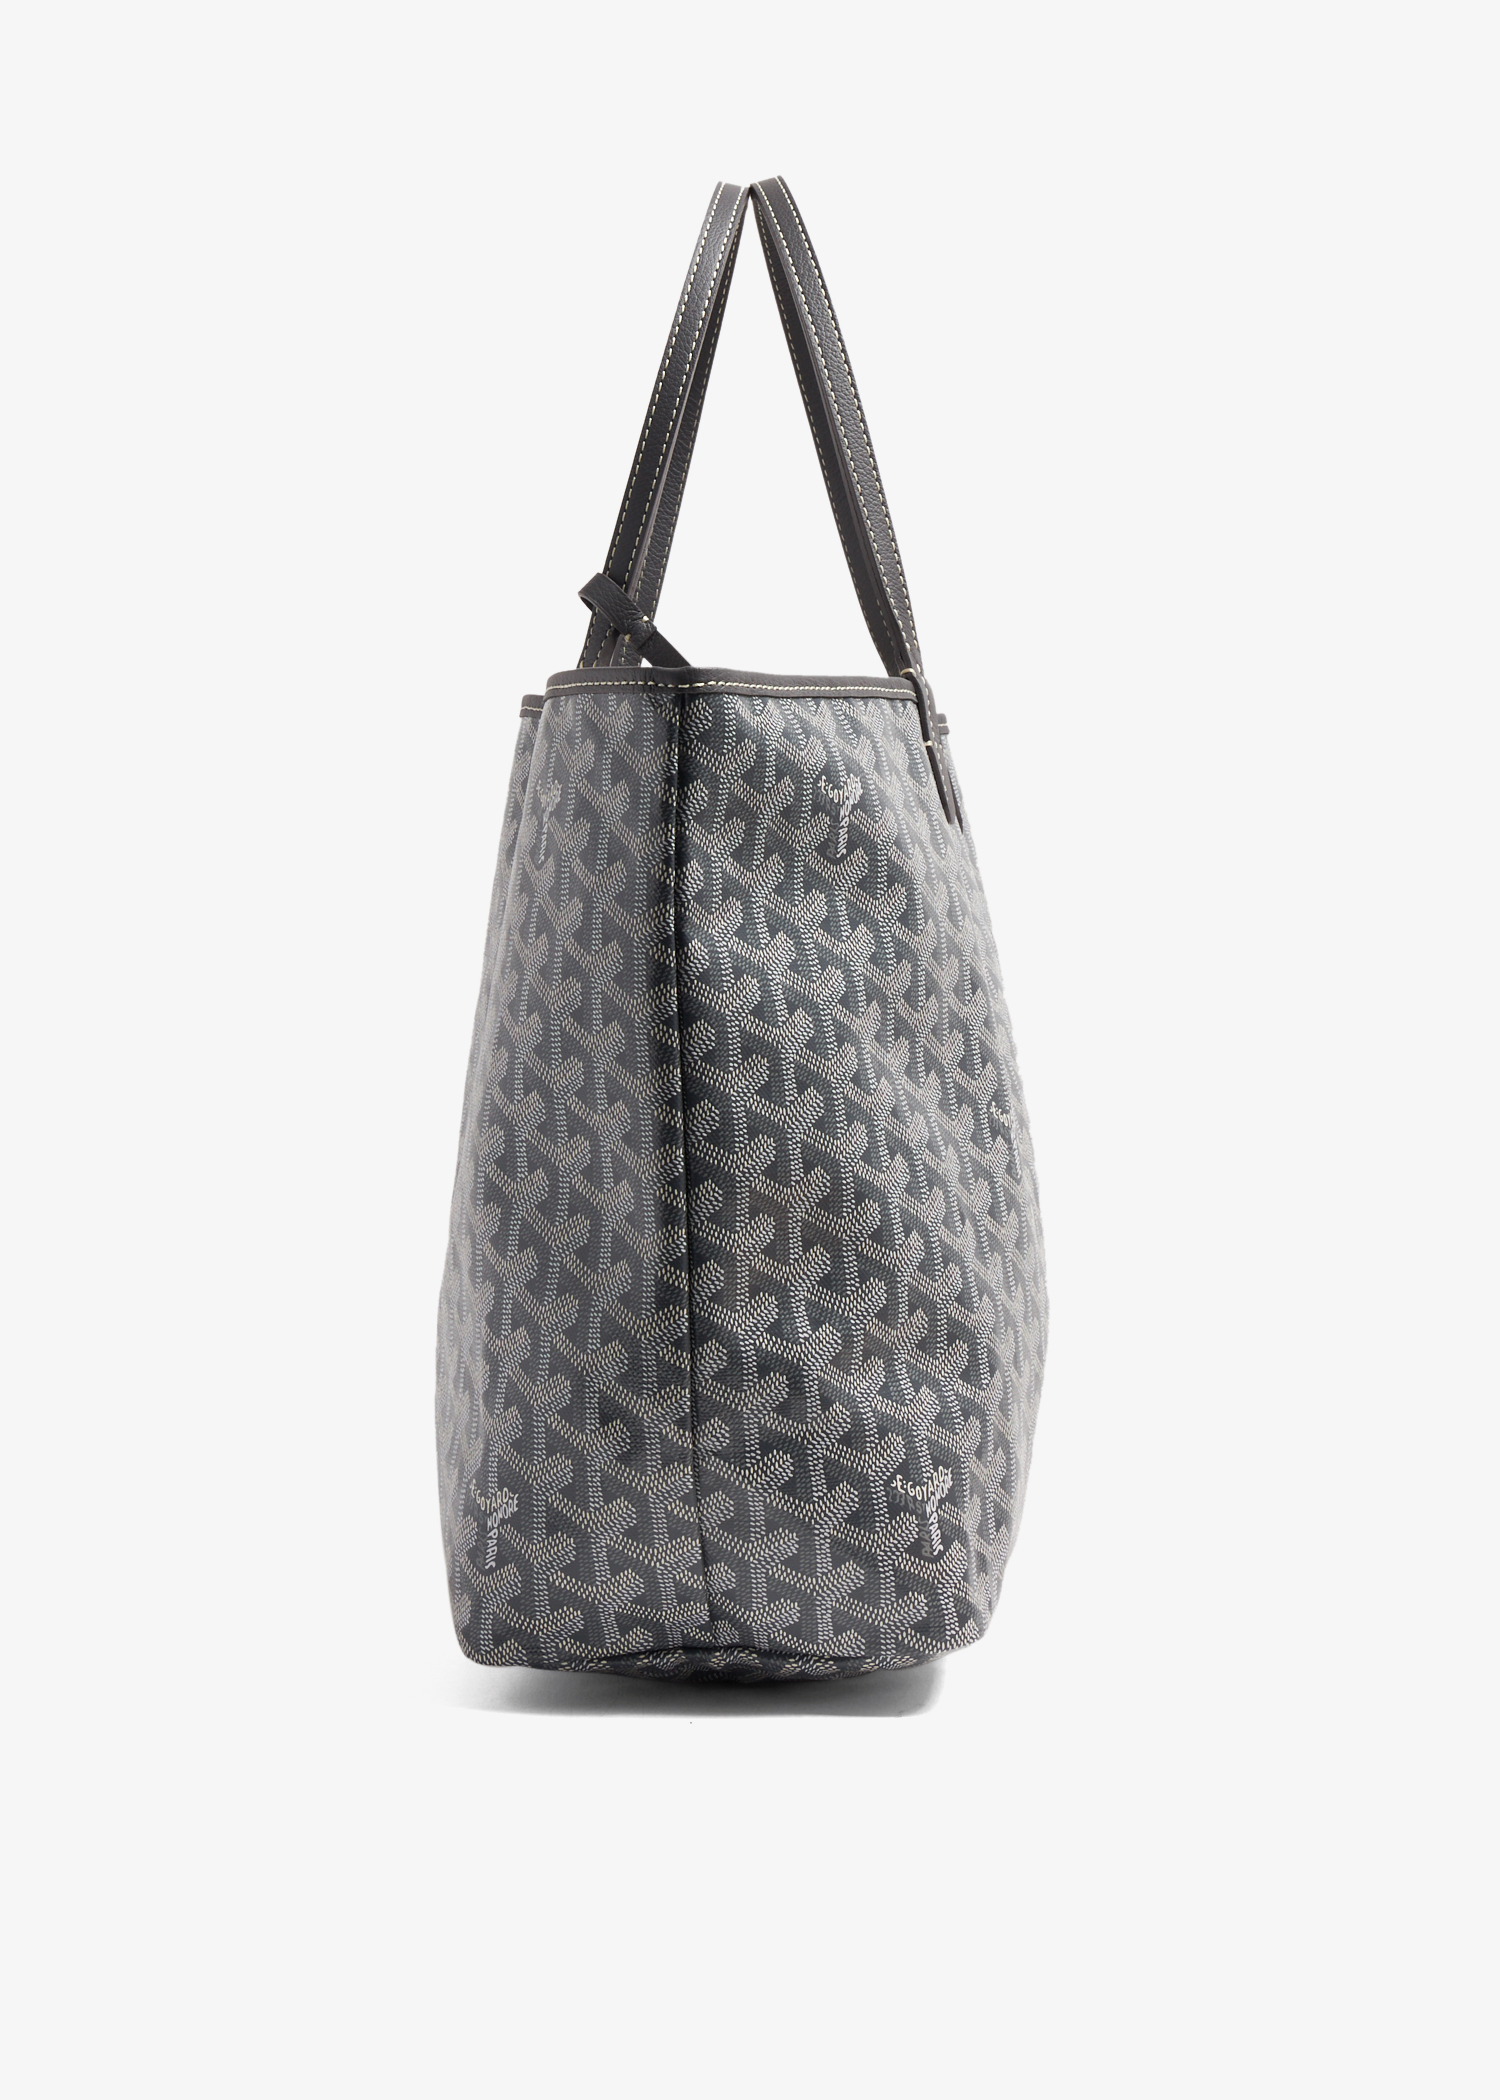 Goyard St. Louis PM Tote (Black). New, with tags, from Paris.